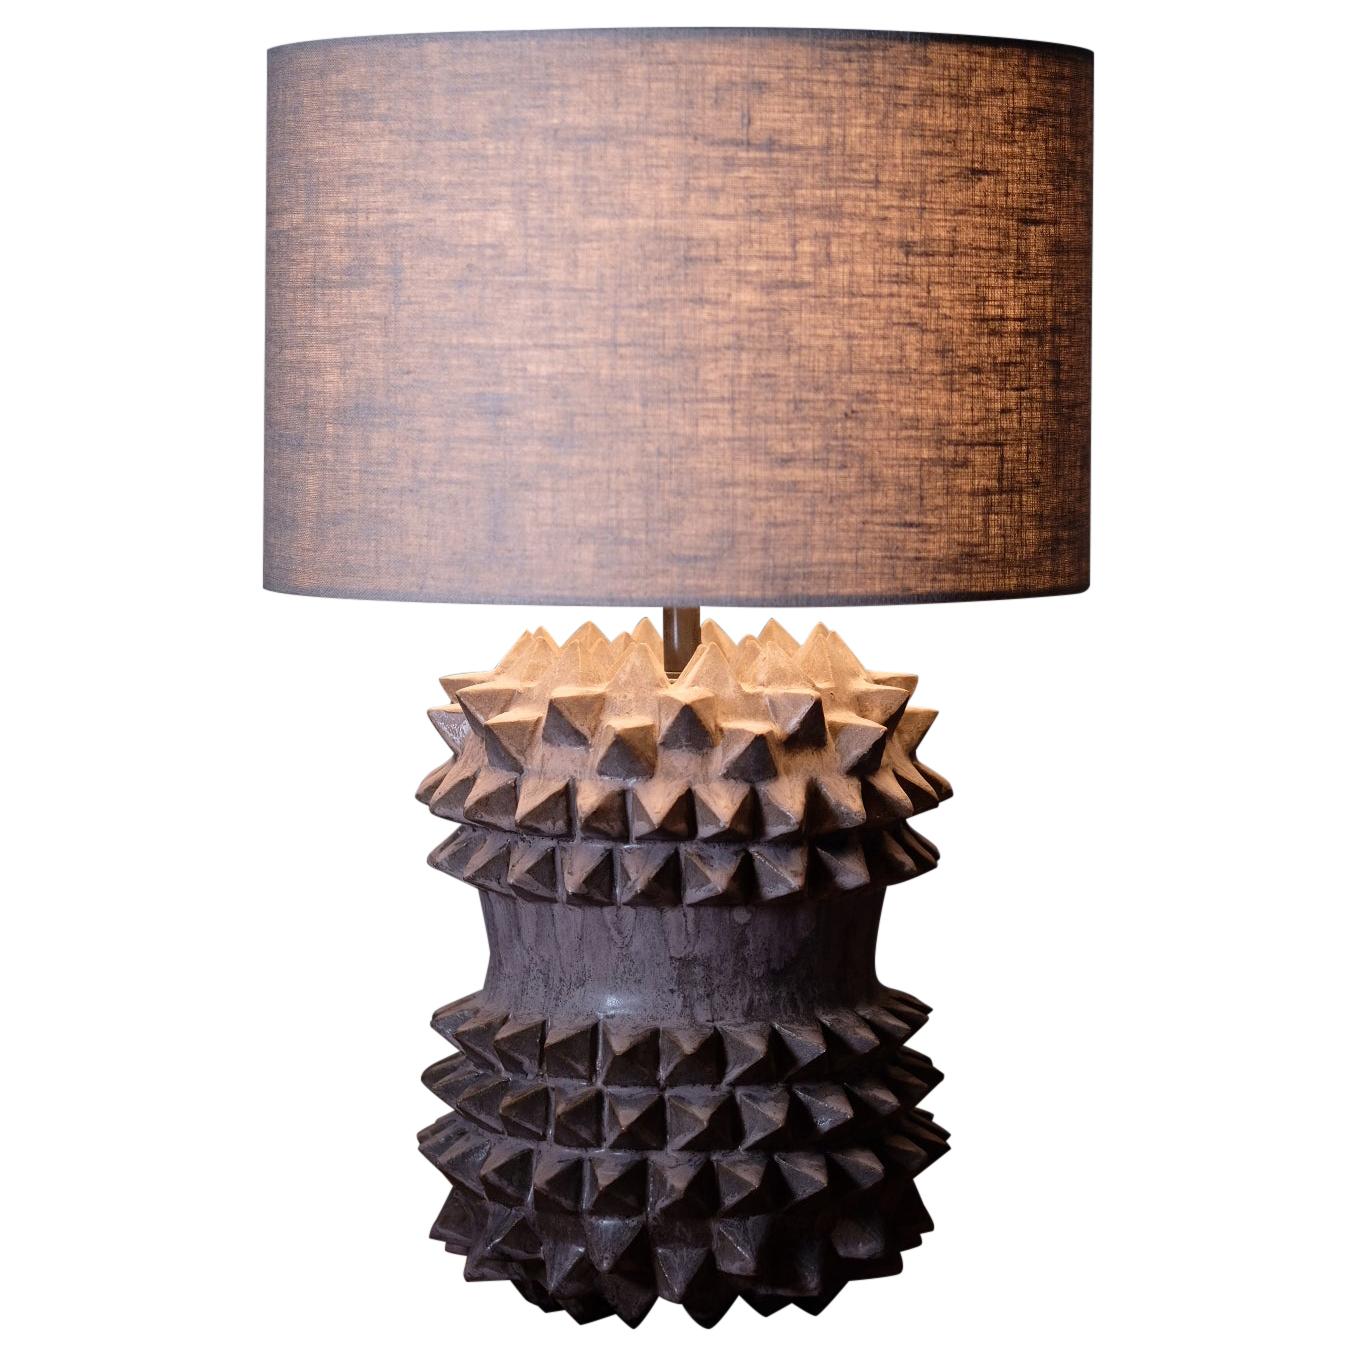 Studded Stoneware Barrel Table Lamp with Dark Grey Linen Shade by LGS Studio For Sale